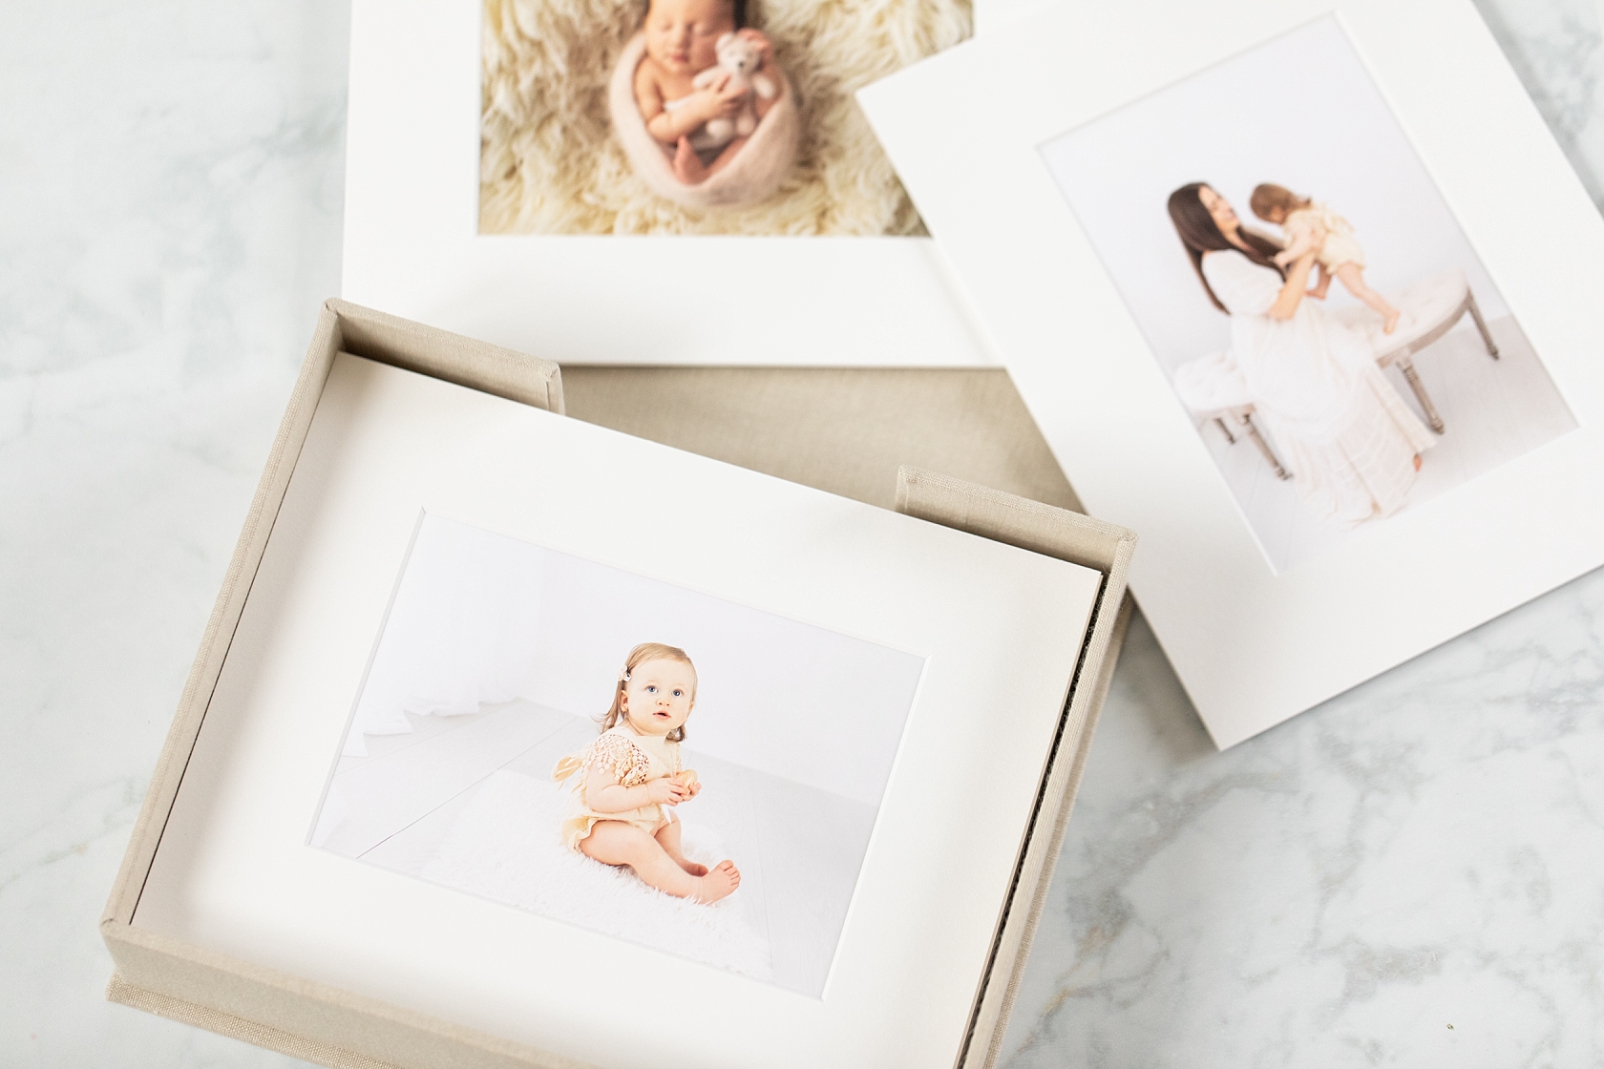 Matted Fine Art Prints box with Rebecca Leigh Photography in Ellicott City Maryland